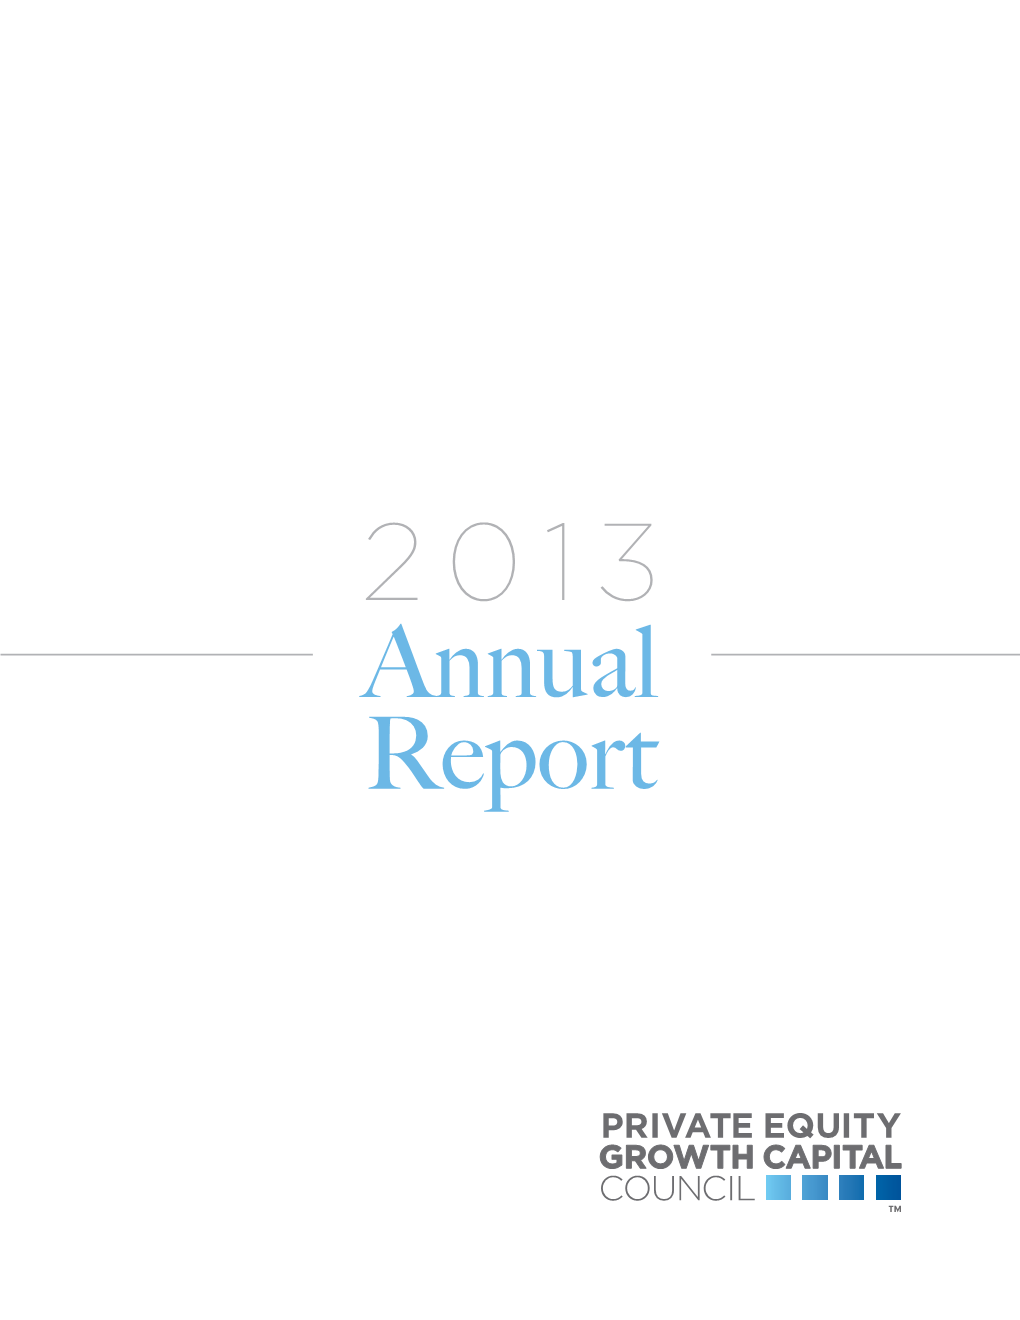 2013 Annual Report in 2013 Alone, Private Equity Invested More Than $400 Billion 2013 in ROUGHLY 2,000 U.S